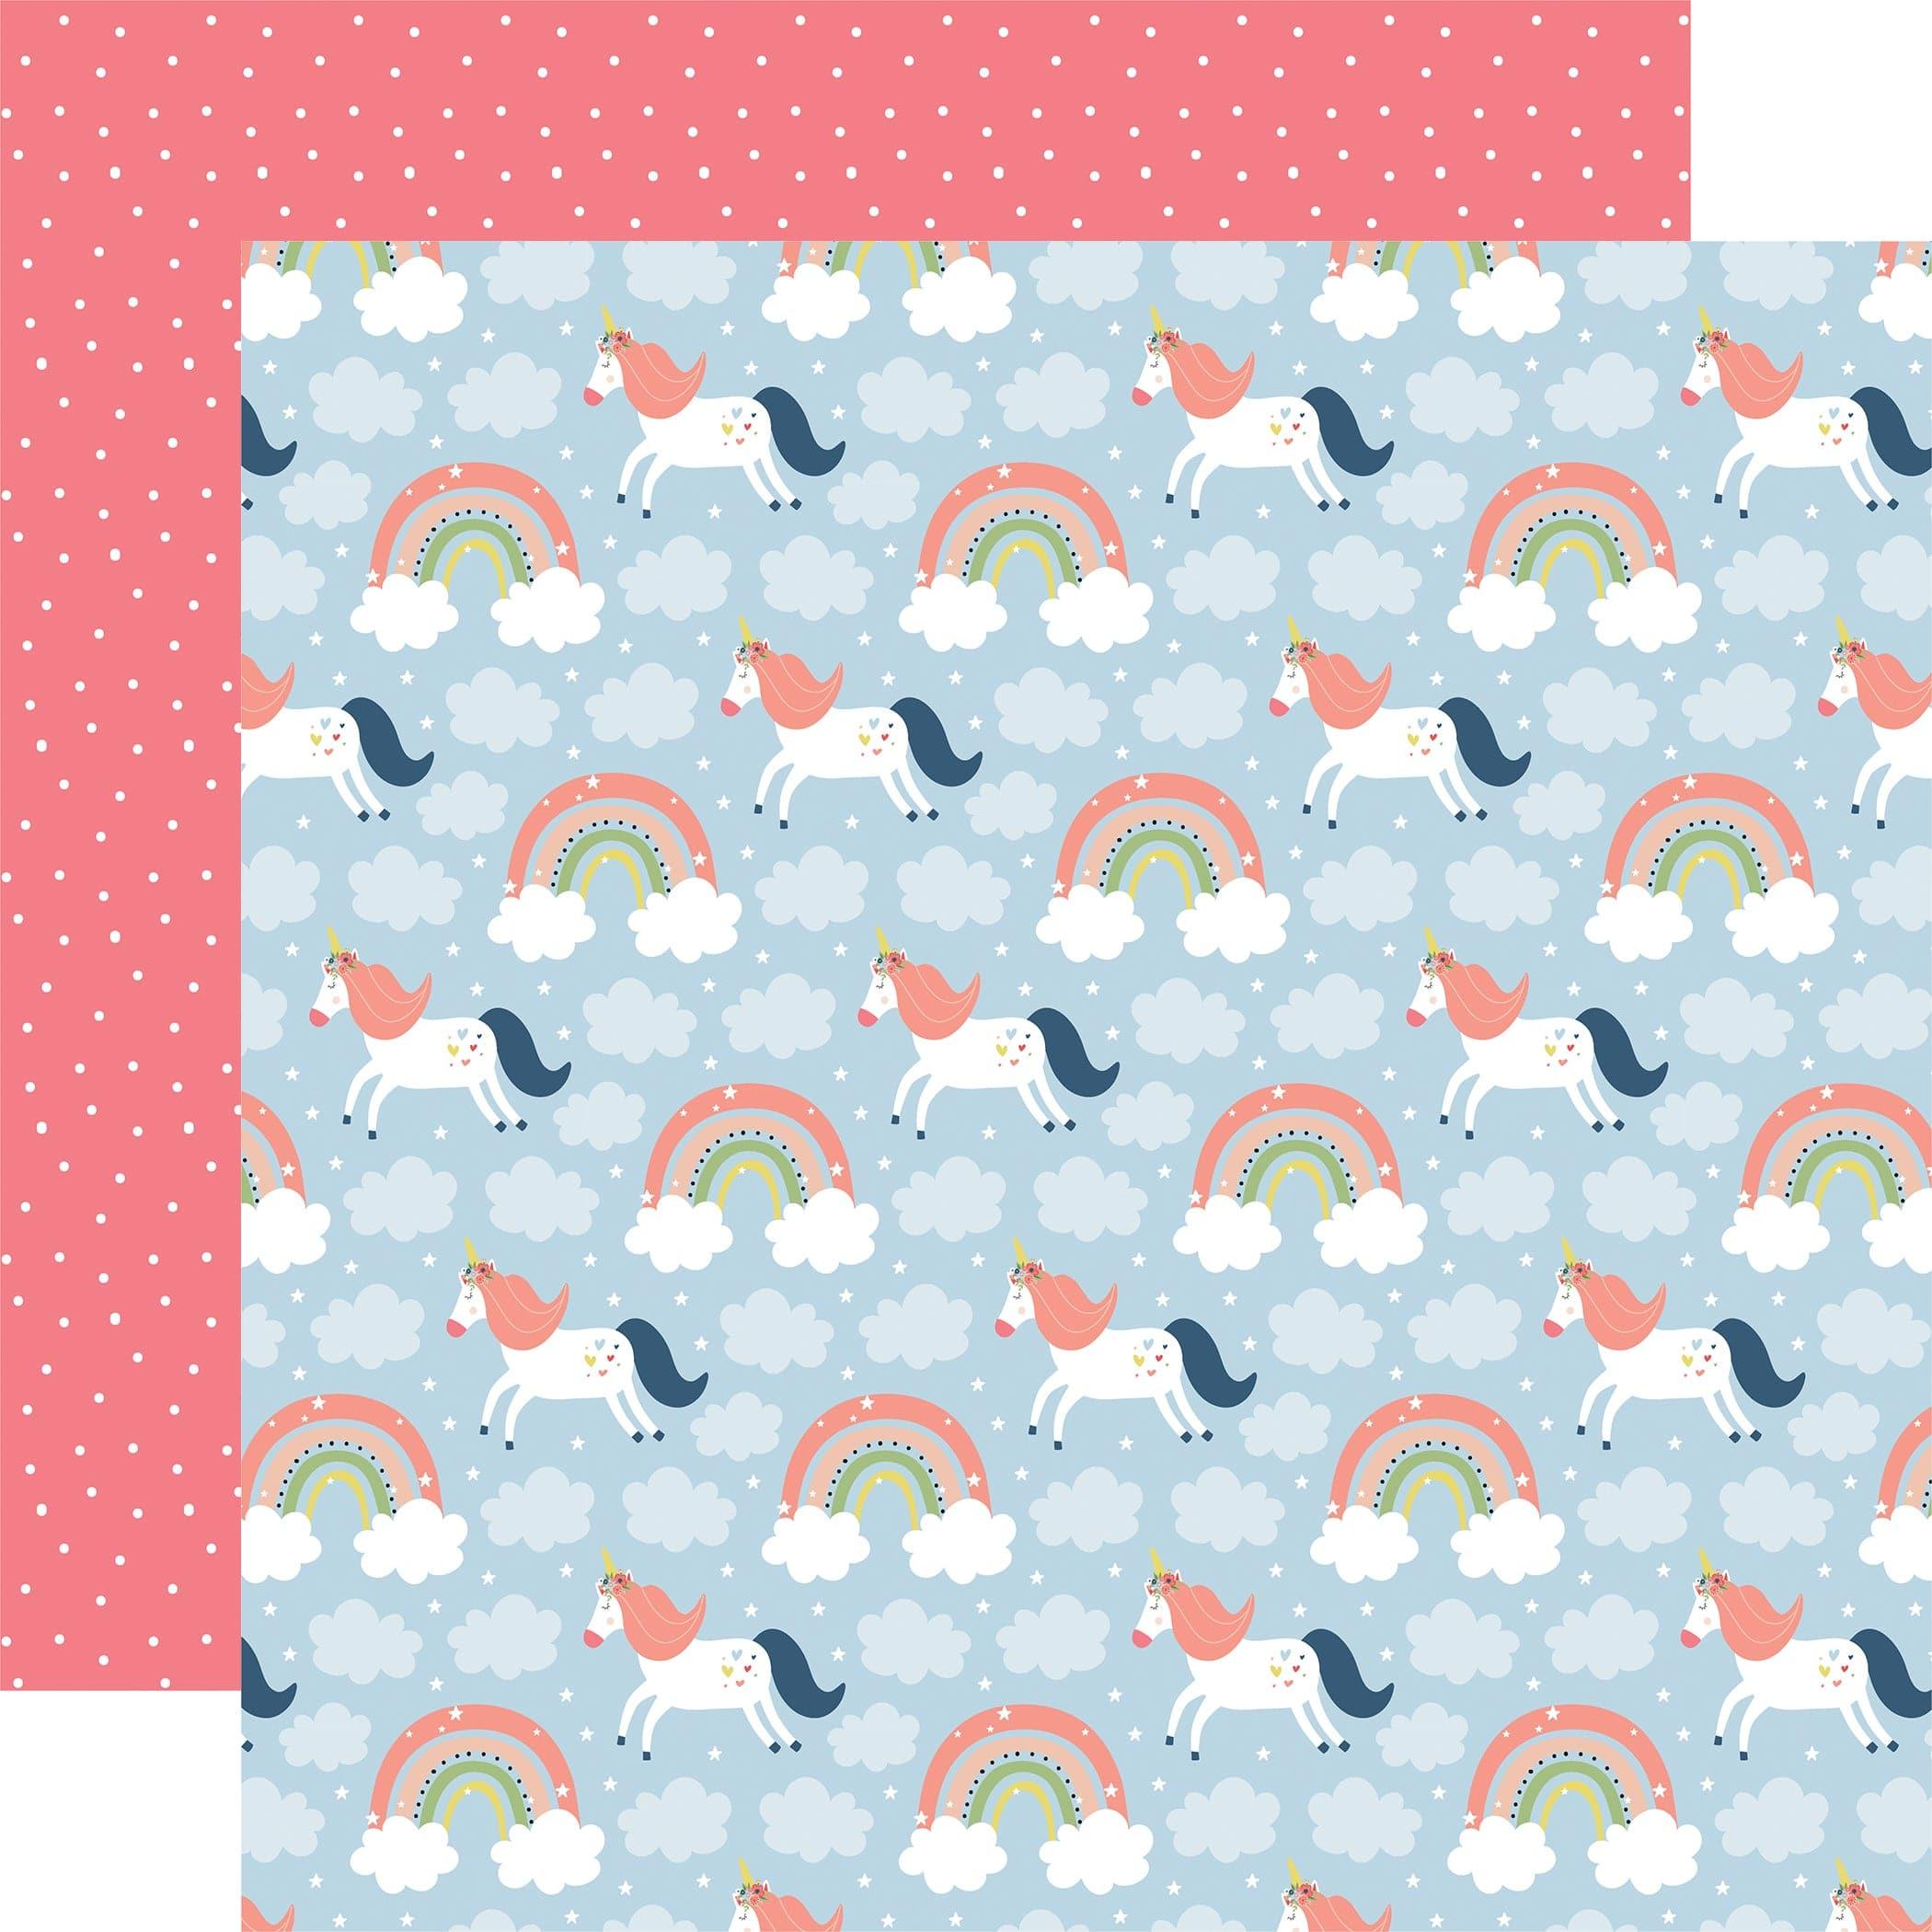 Little Dreamer Girl Collection Riding Rainbows 12 x 12 Double-Sided Scrapbook Paper by Echo Park Paper - Scrapbook Supply Companies